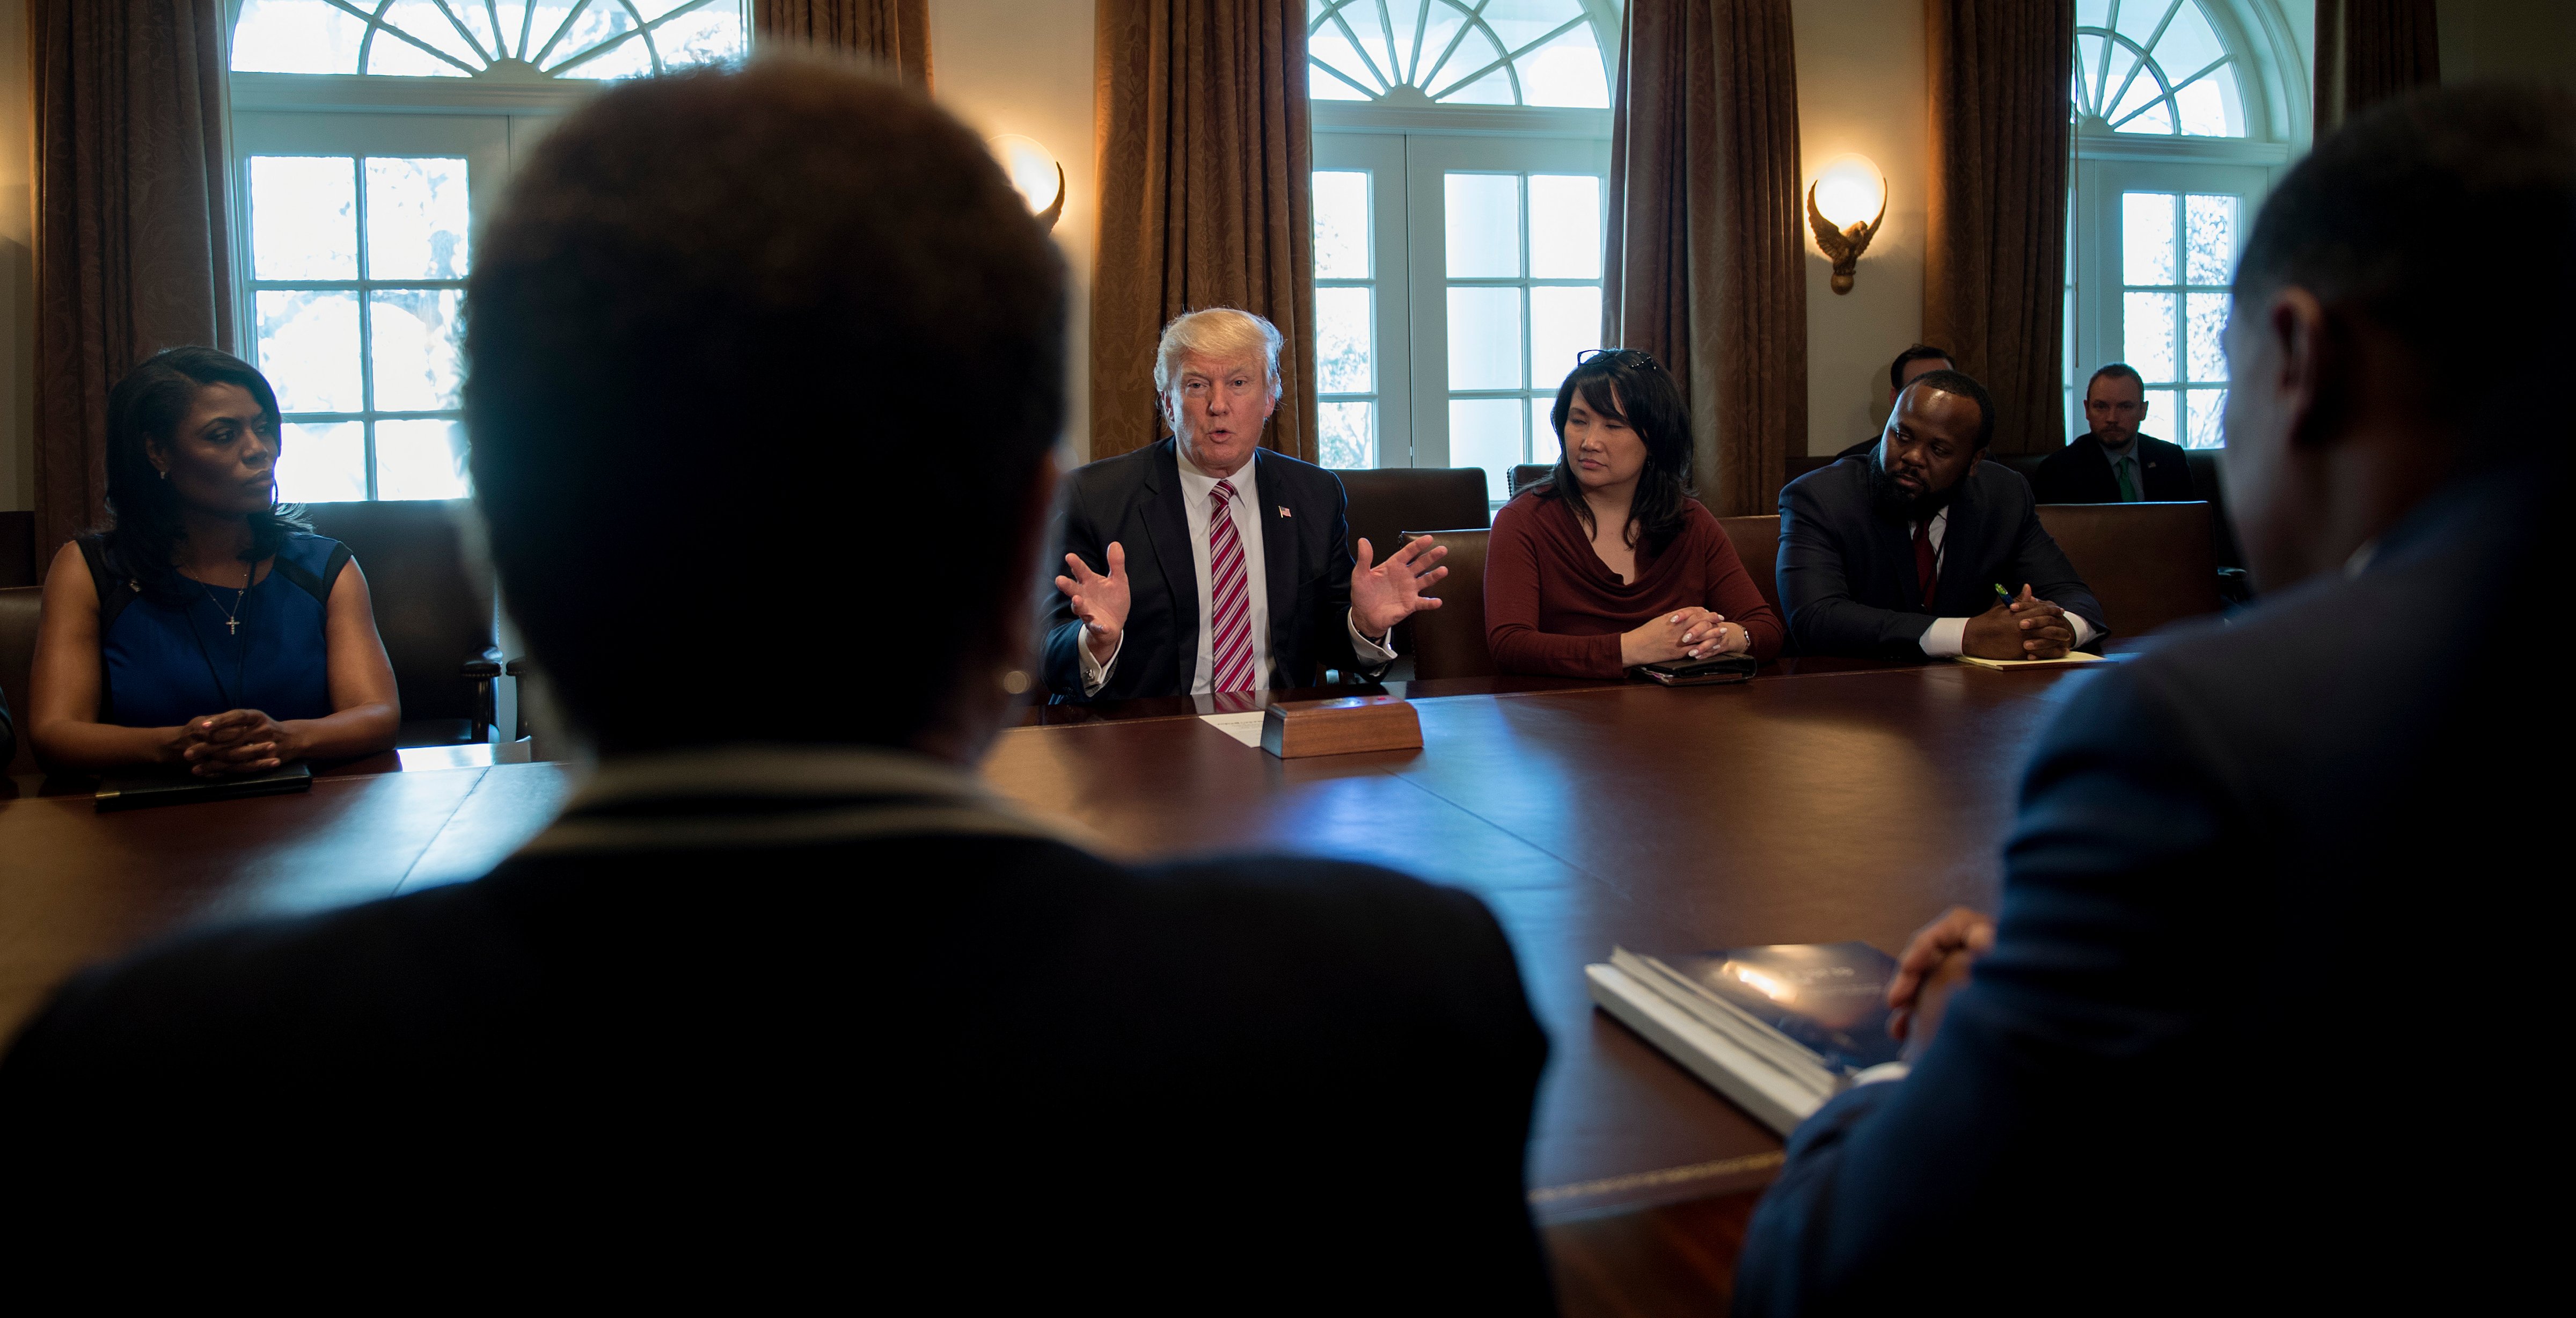 US President Donald Trump (C) meets with the Congressional Black Caucus Executive Committee at the White House in Washington, DC, March 22, 2017 (JIM WATSON—AFP/Getty Images)